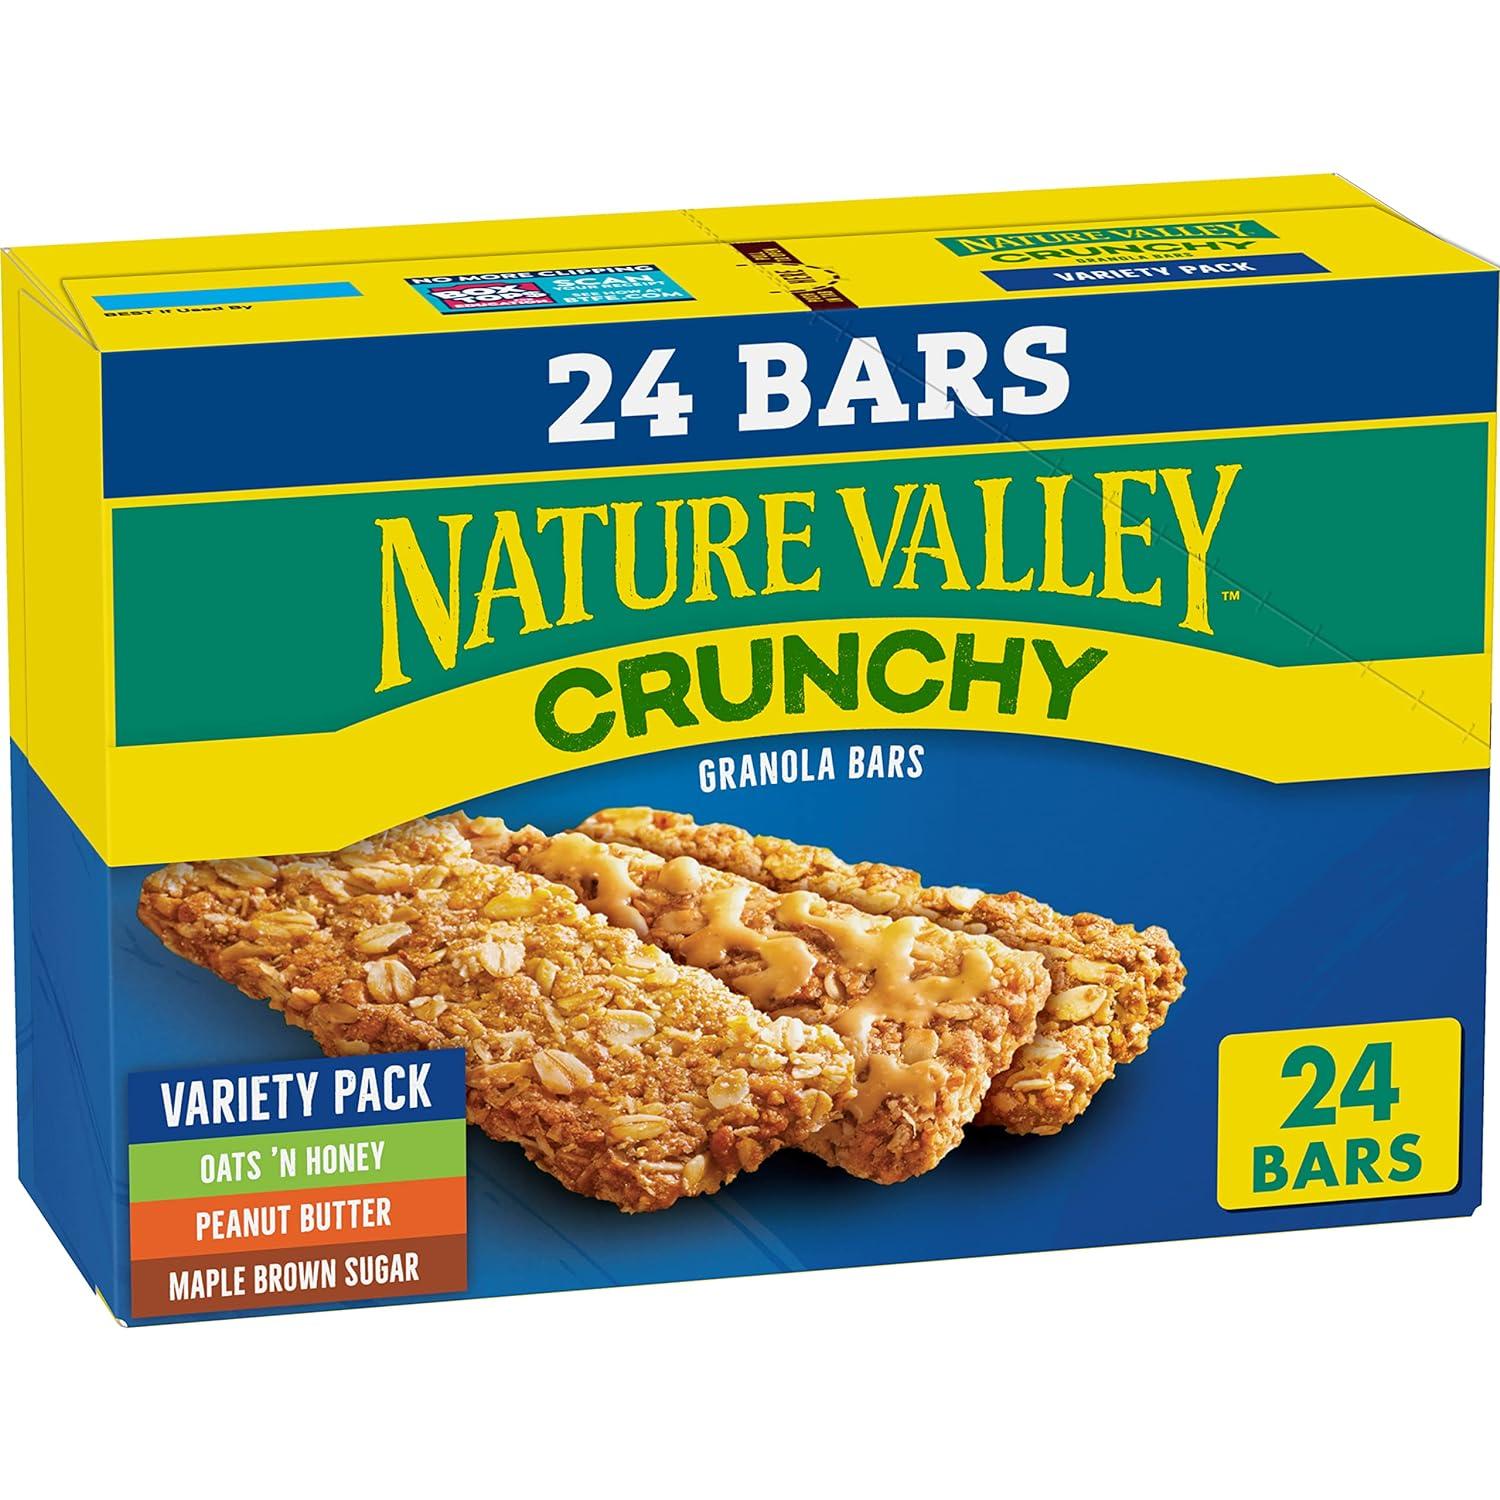 Nature Valley Crunchy Granola Bars Variety Pack 12 Pack for $3.74